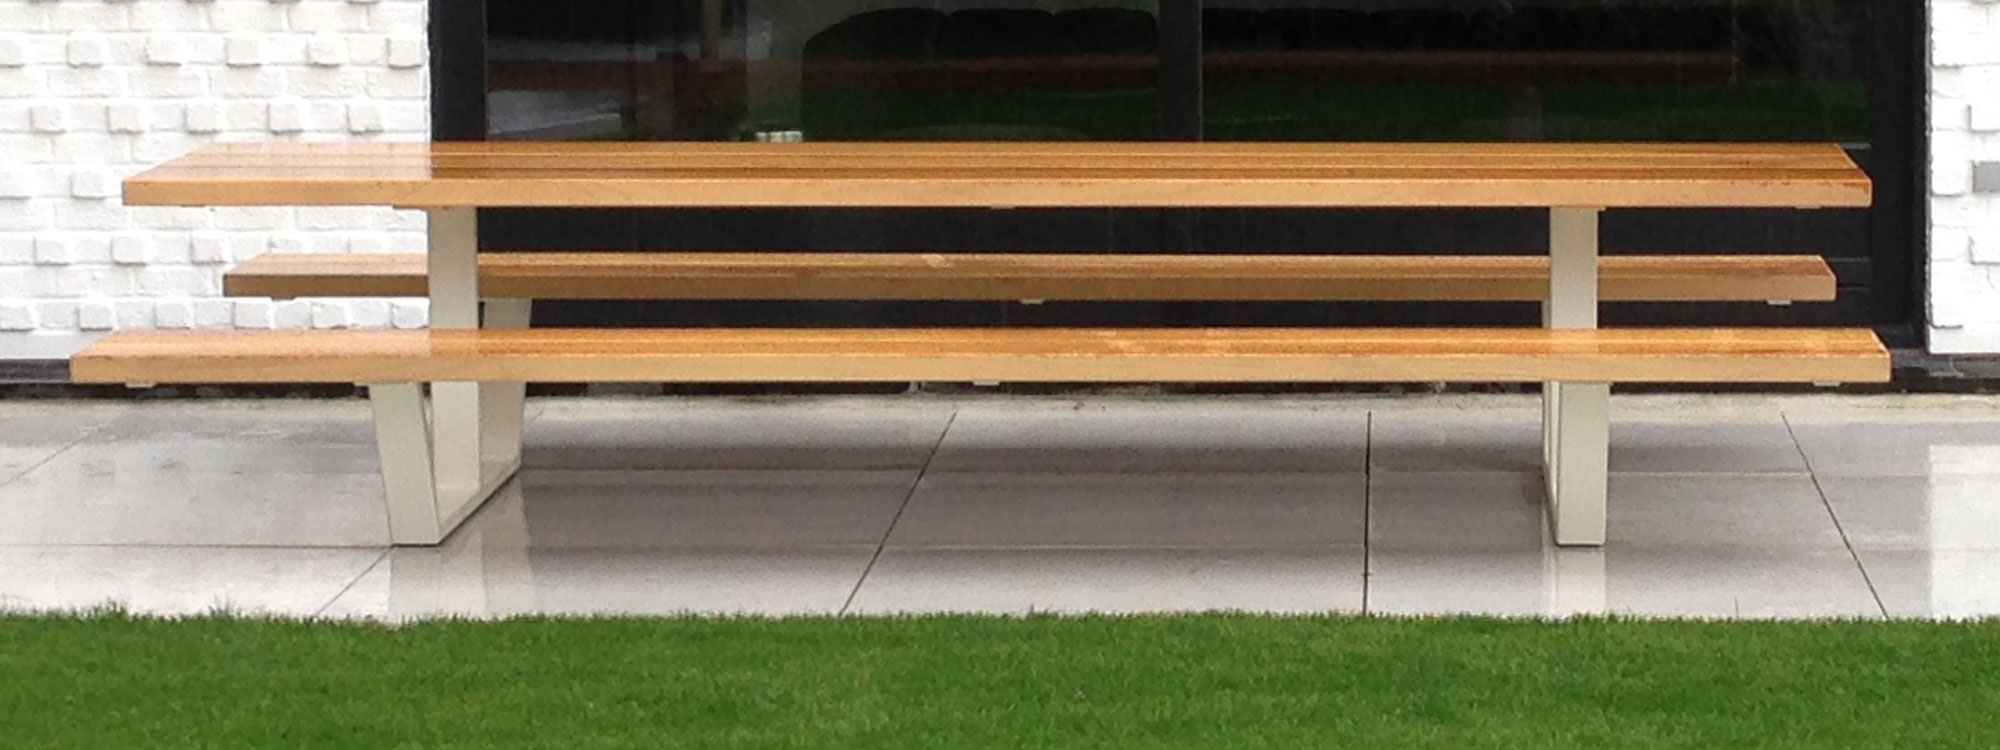 Image showing Linear Design Of Cassecroute MODERN Picnic Table